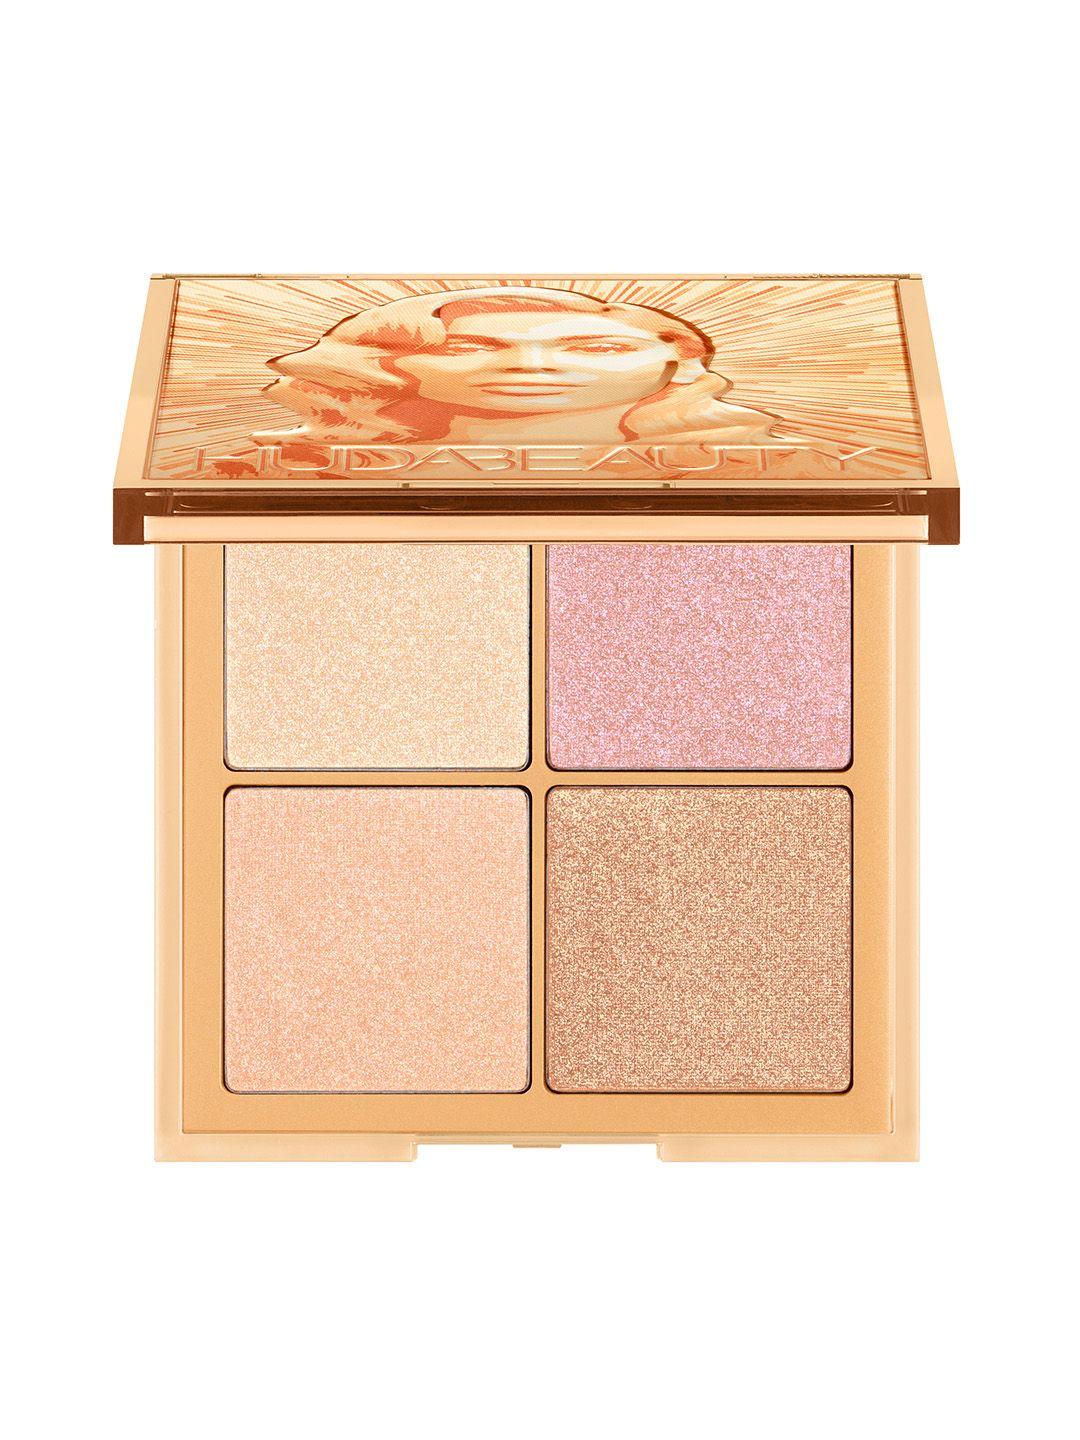 huda beauty glow obsessions highlighter face palette 6.4g - light